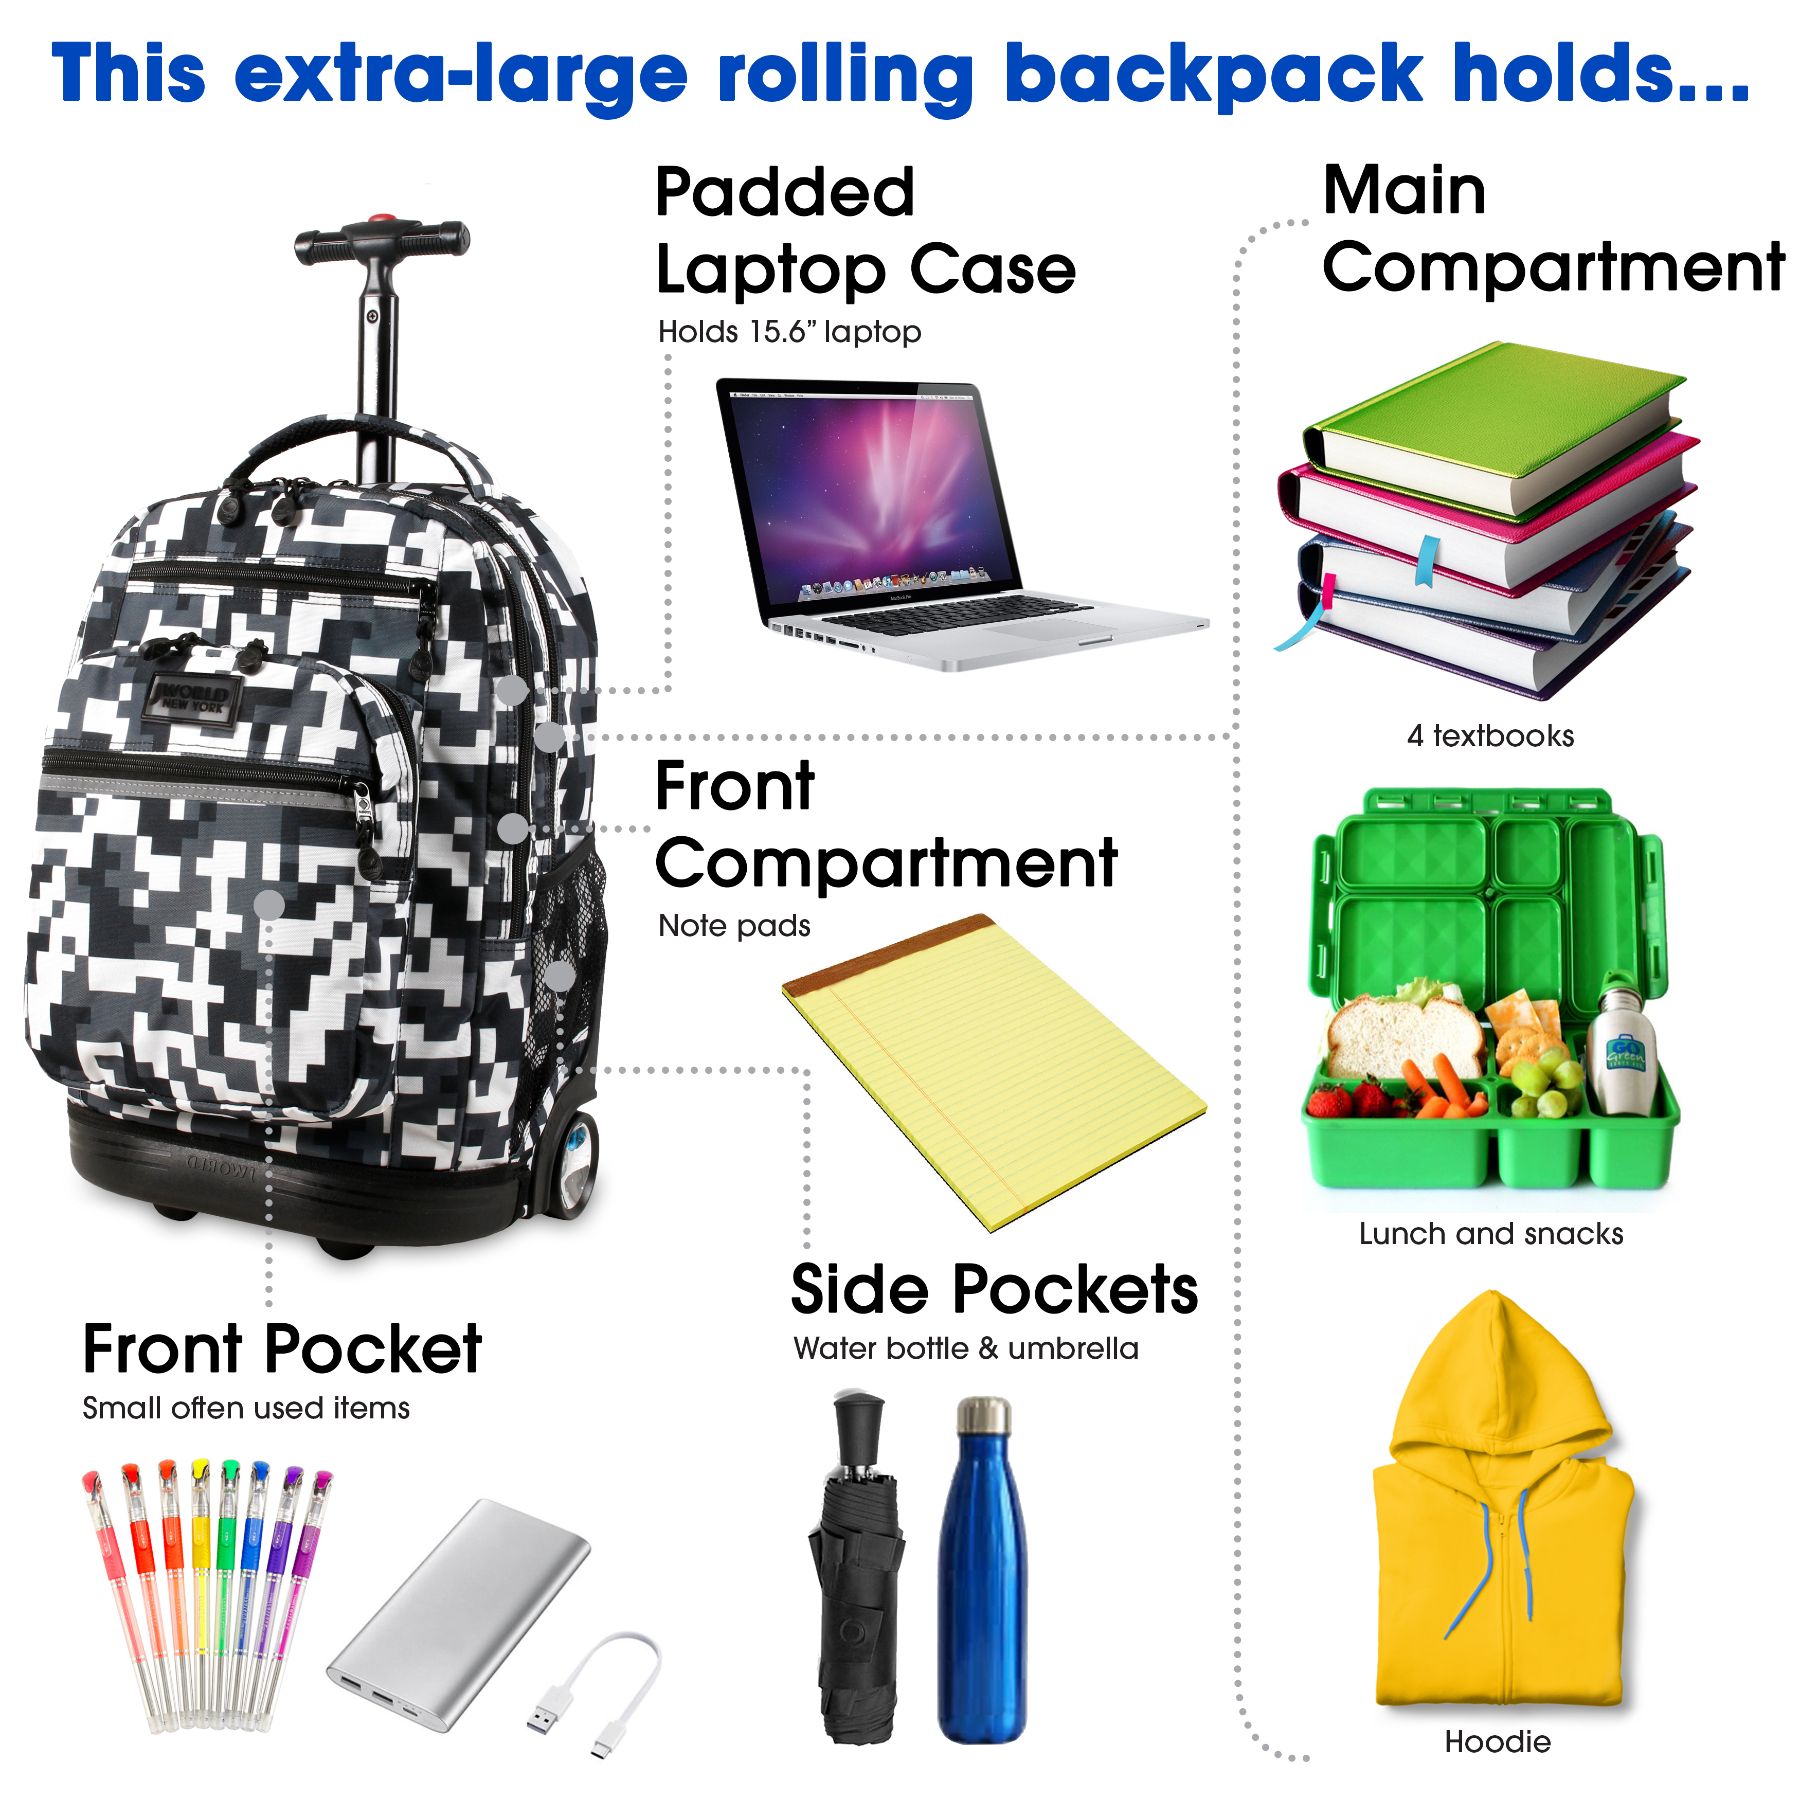 J World Unisex Sundance 20" Rolling Backpack with Laptop Sleeve for School and Travel, Camo - image 4 of 7